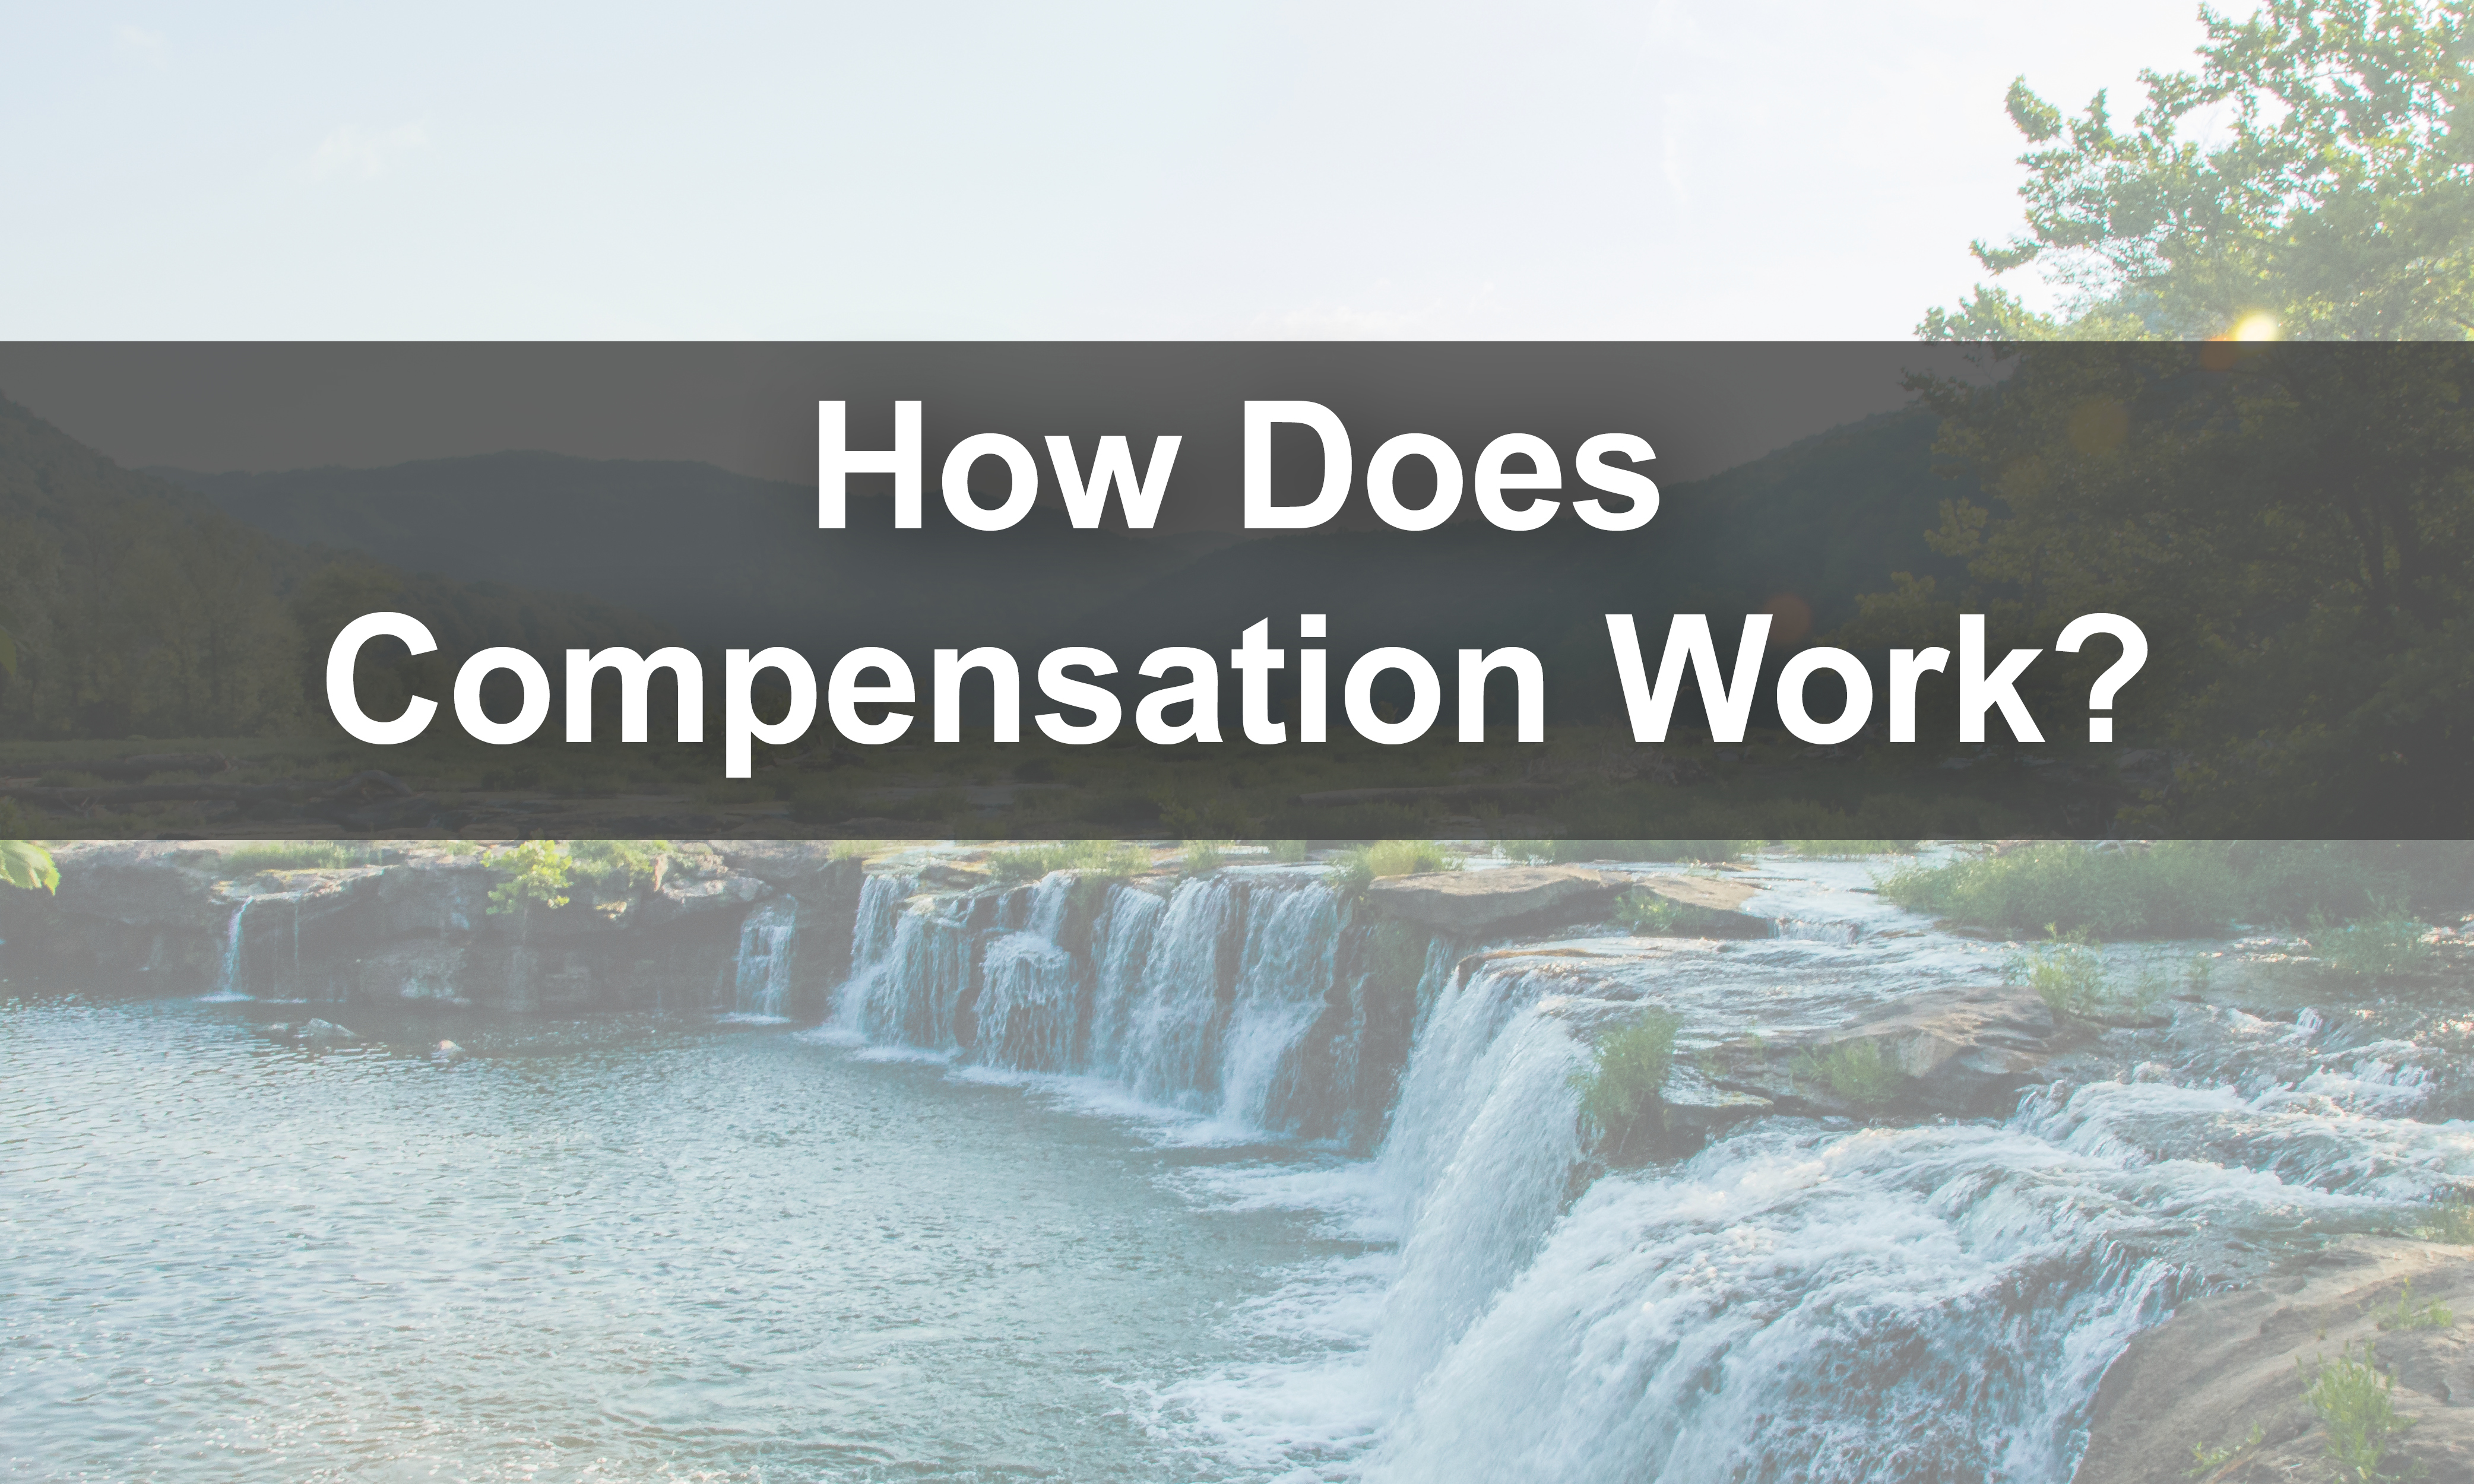 Link to compensation explanation